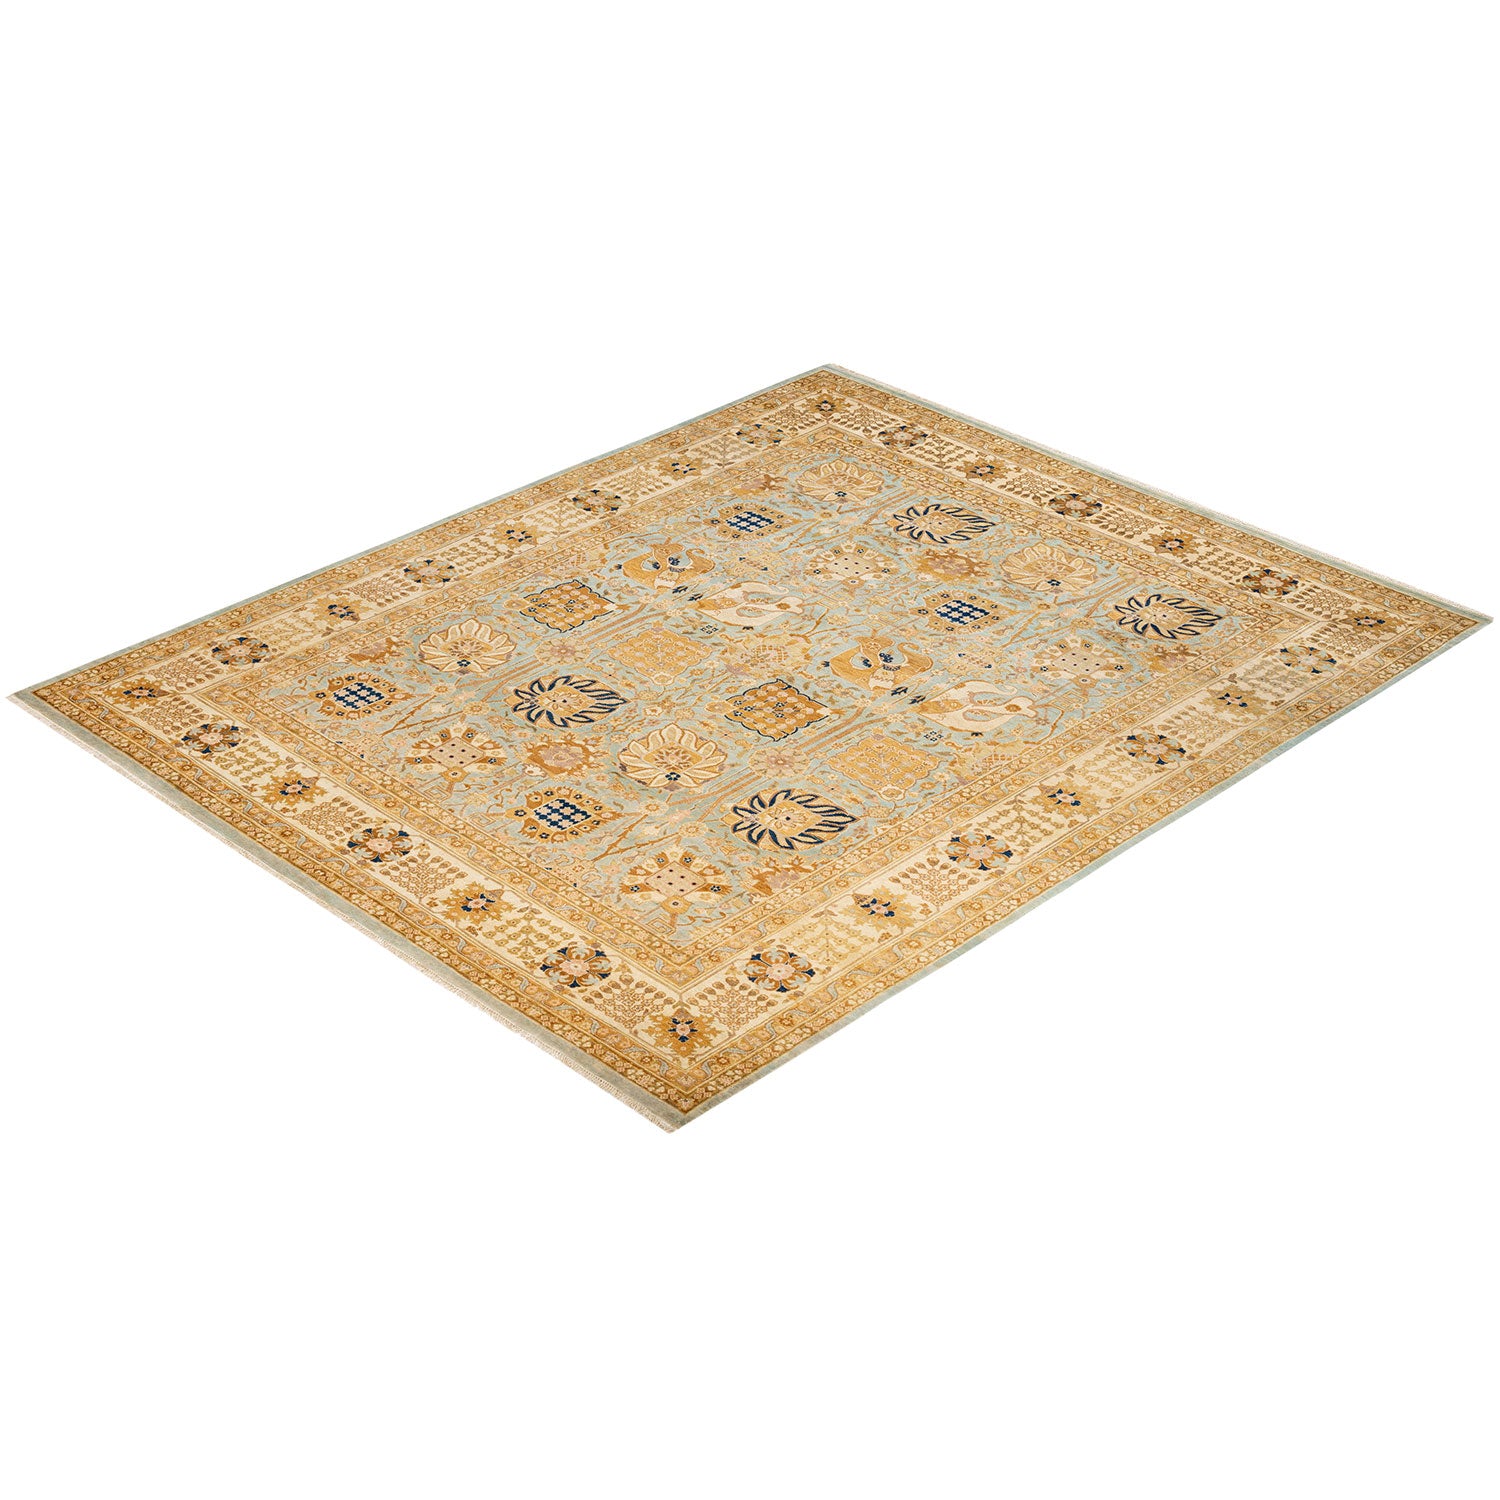 Ornate Persian-style rug with intricate geometric and floral patterns.